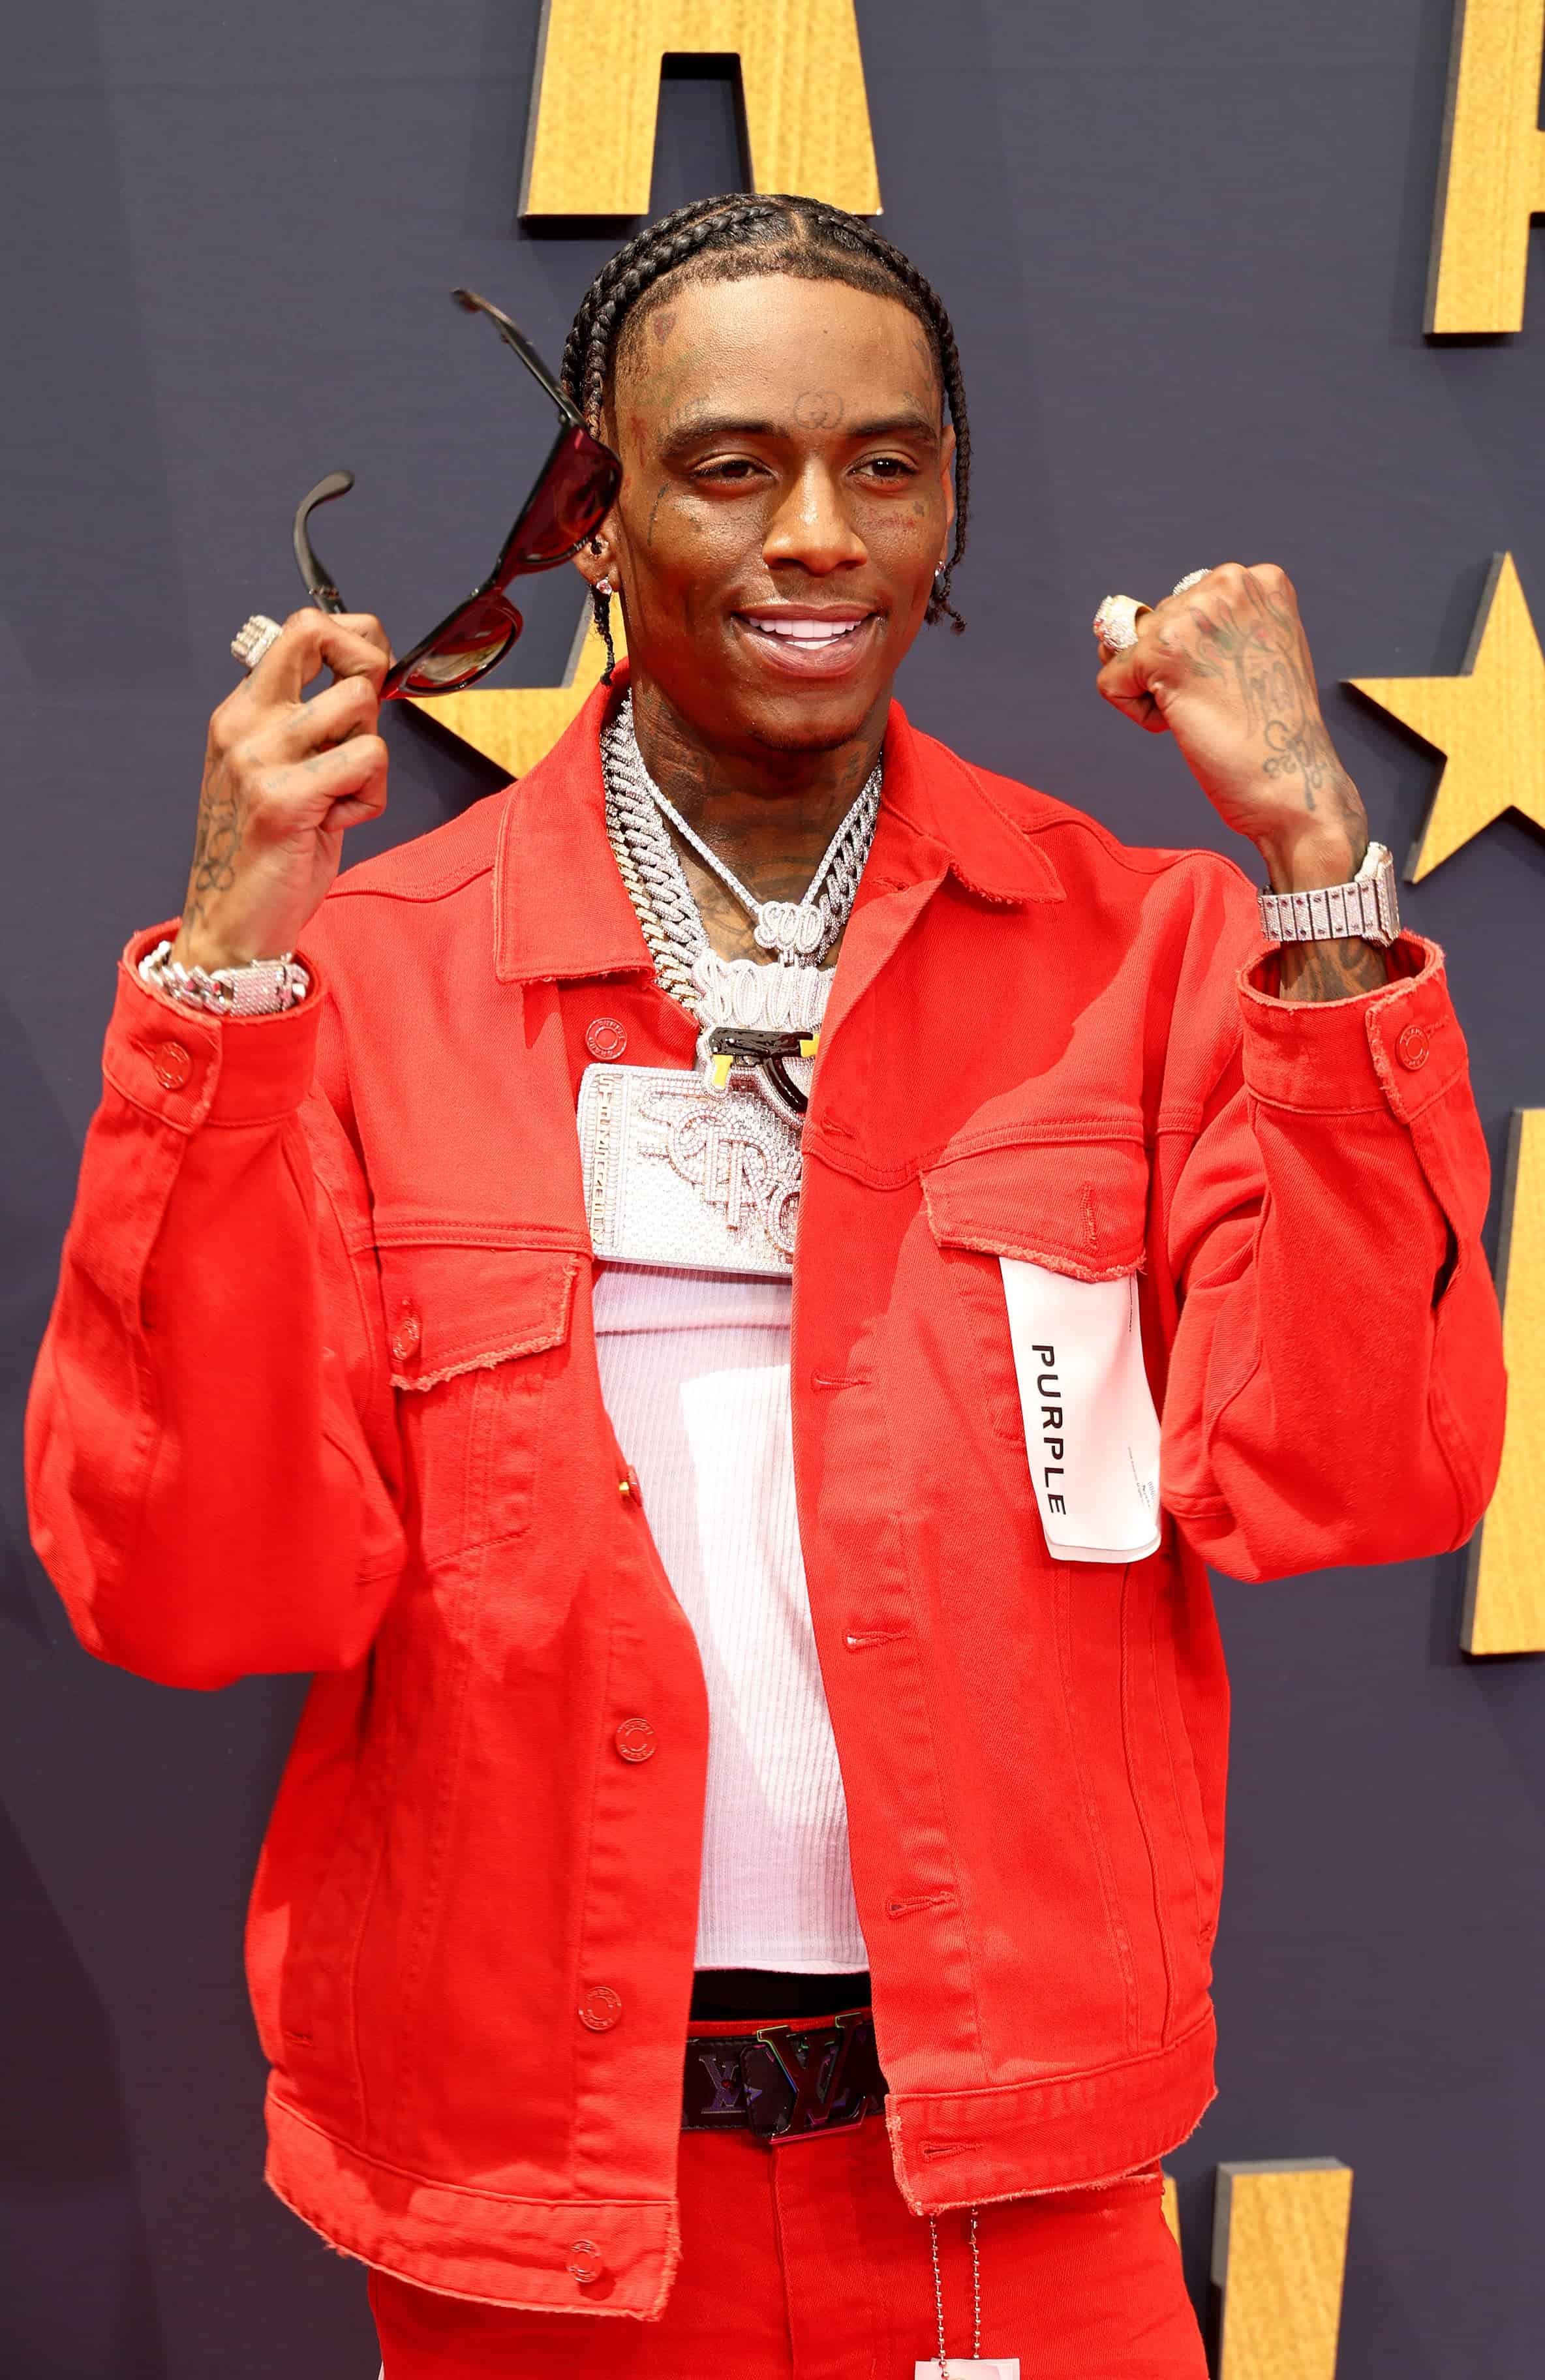 Soulja Boy Claims He Birthed The New Wave Of Hip Hop